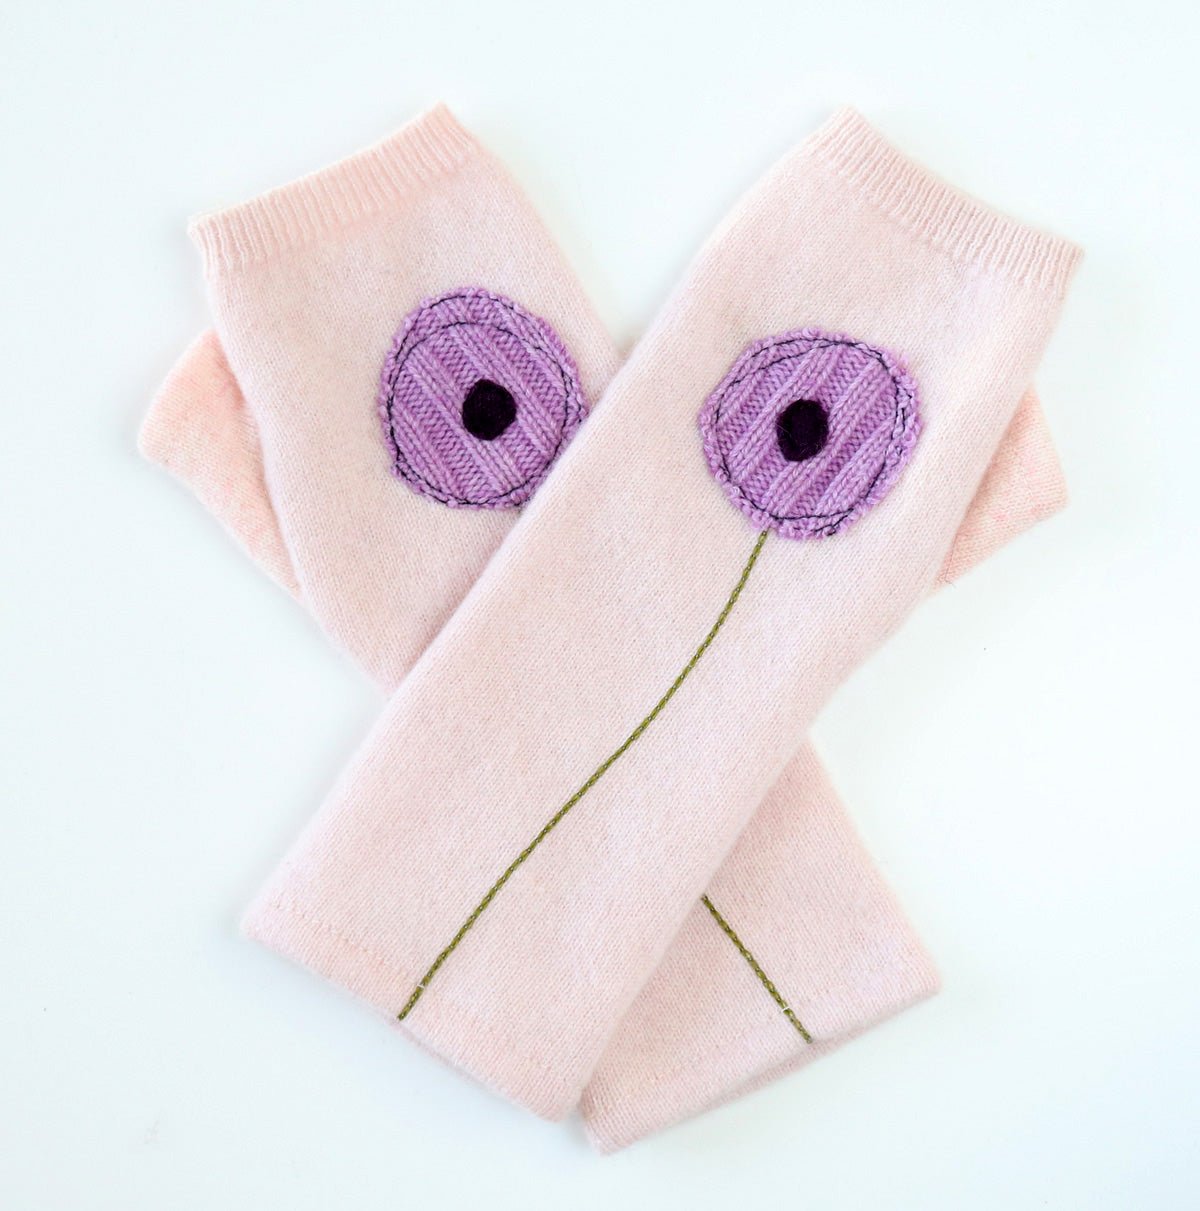 Flower on Baby Pink Cashmere Fingerless Gloves - BESPOKE PROVISIONS INC